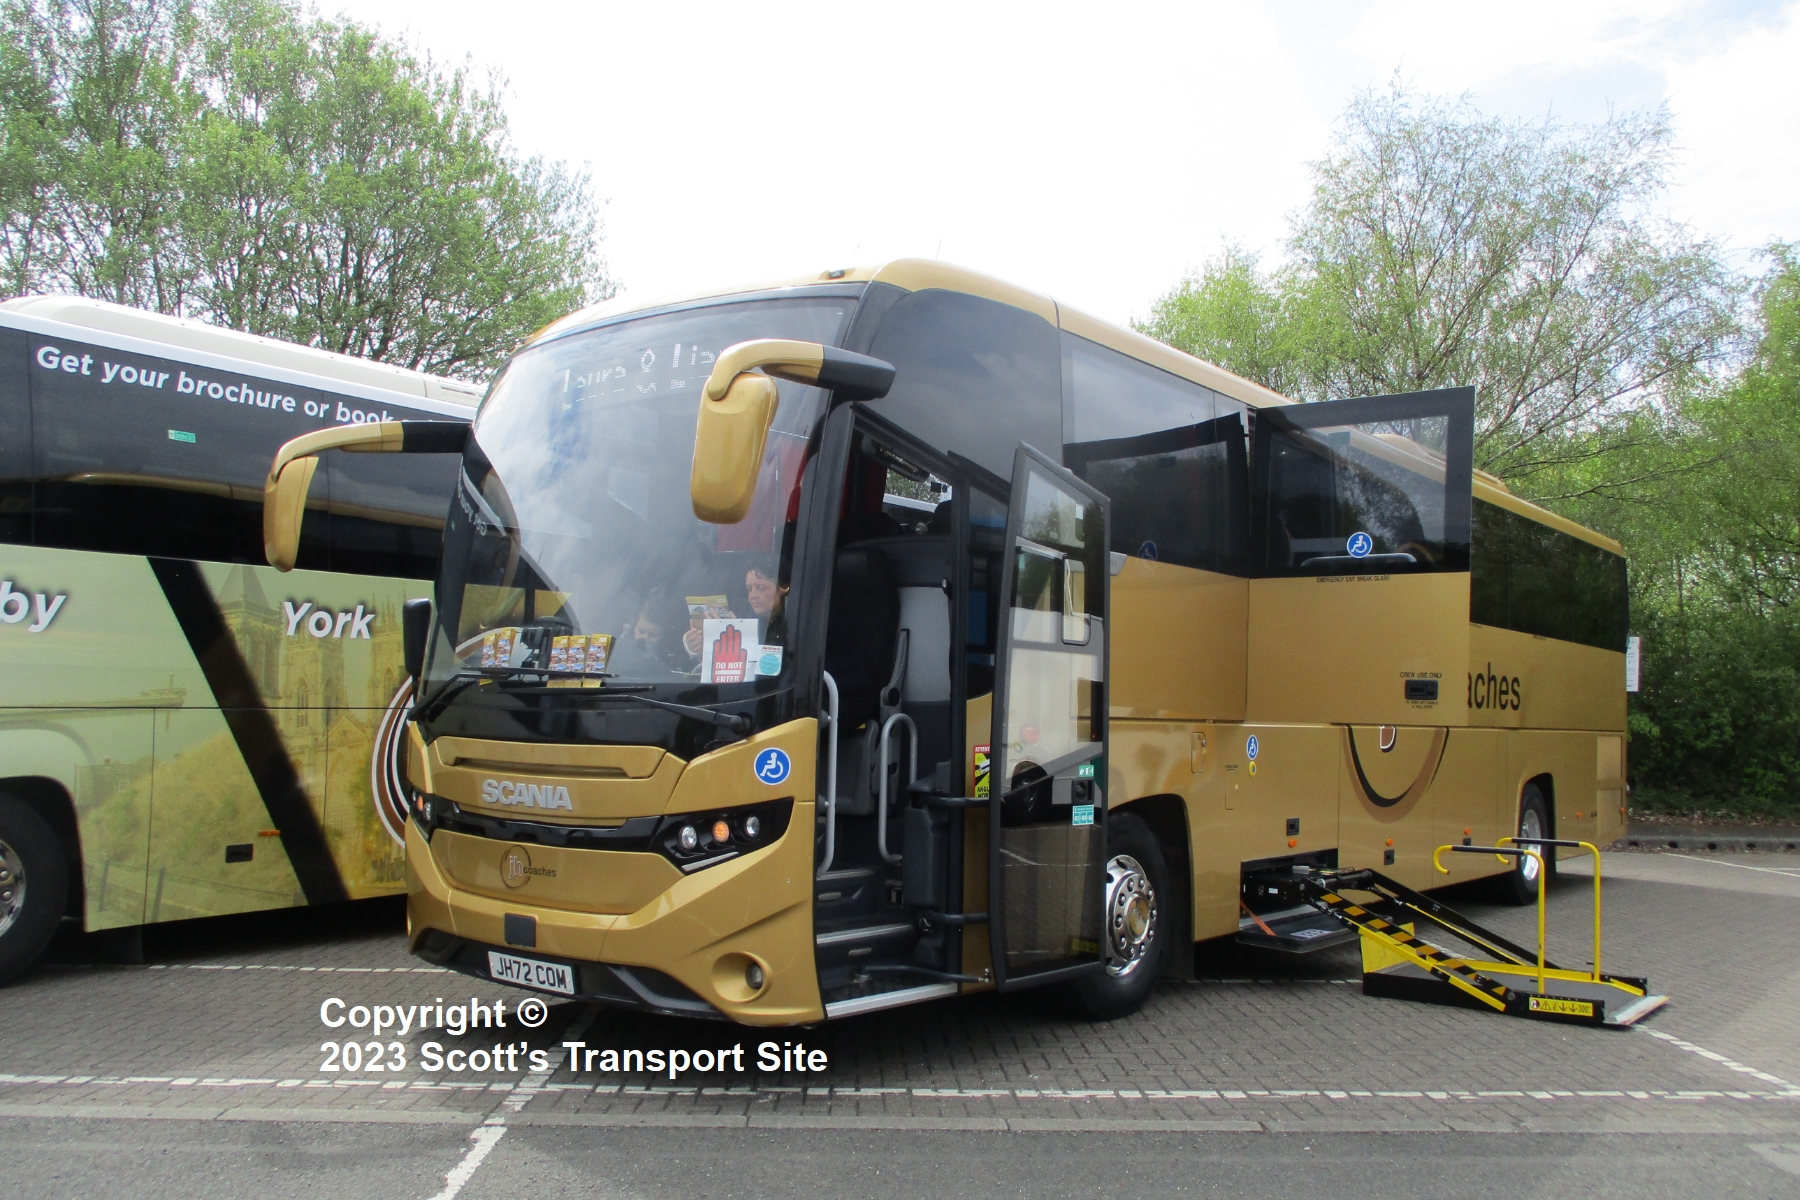 North East Bus and Coach Show 2023